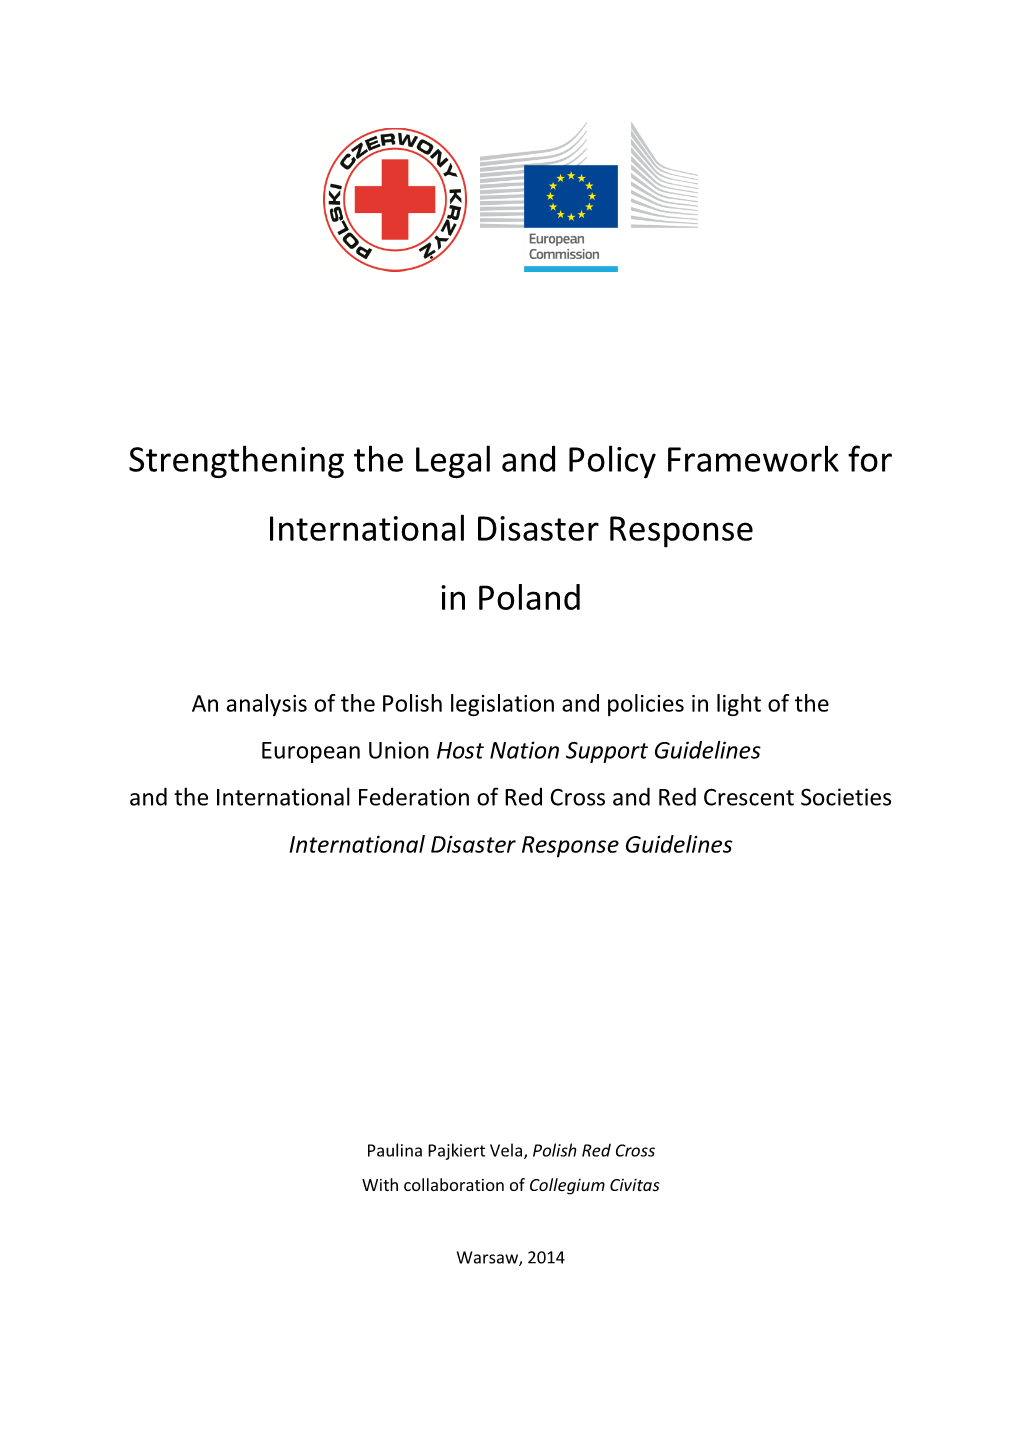 Strengthening the Legal and Policy Framework for International Disaster Response in Poland